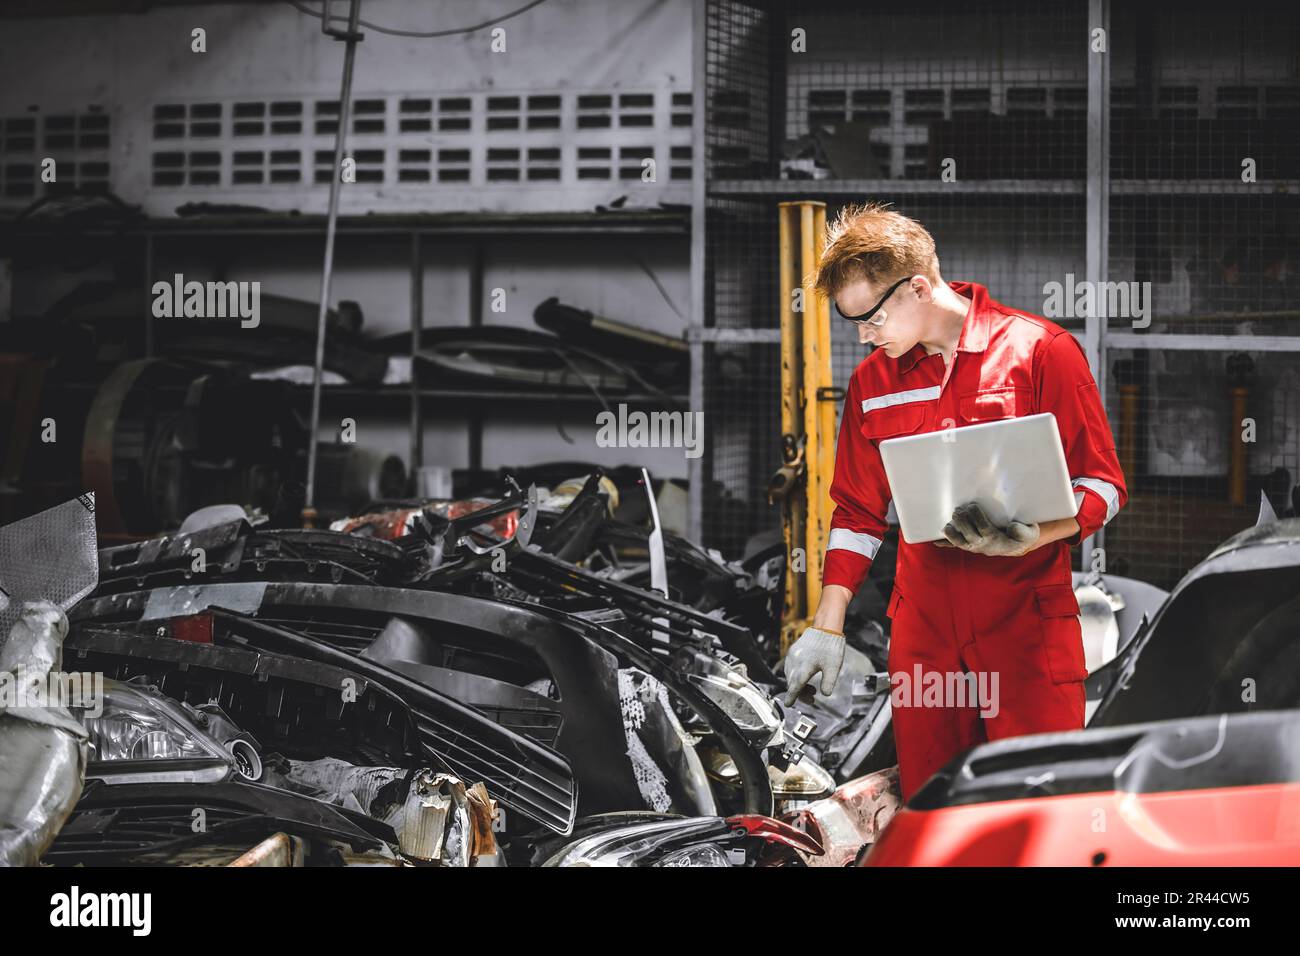 Old used car part warehouse worker checking inventory in garage. Staff worker working in recycle motor junkyard auto parts management. Stock Photo